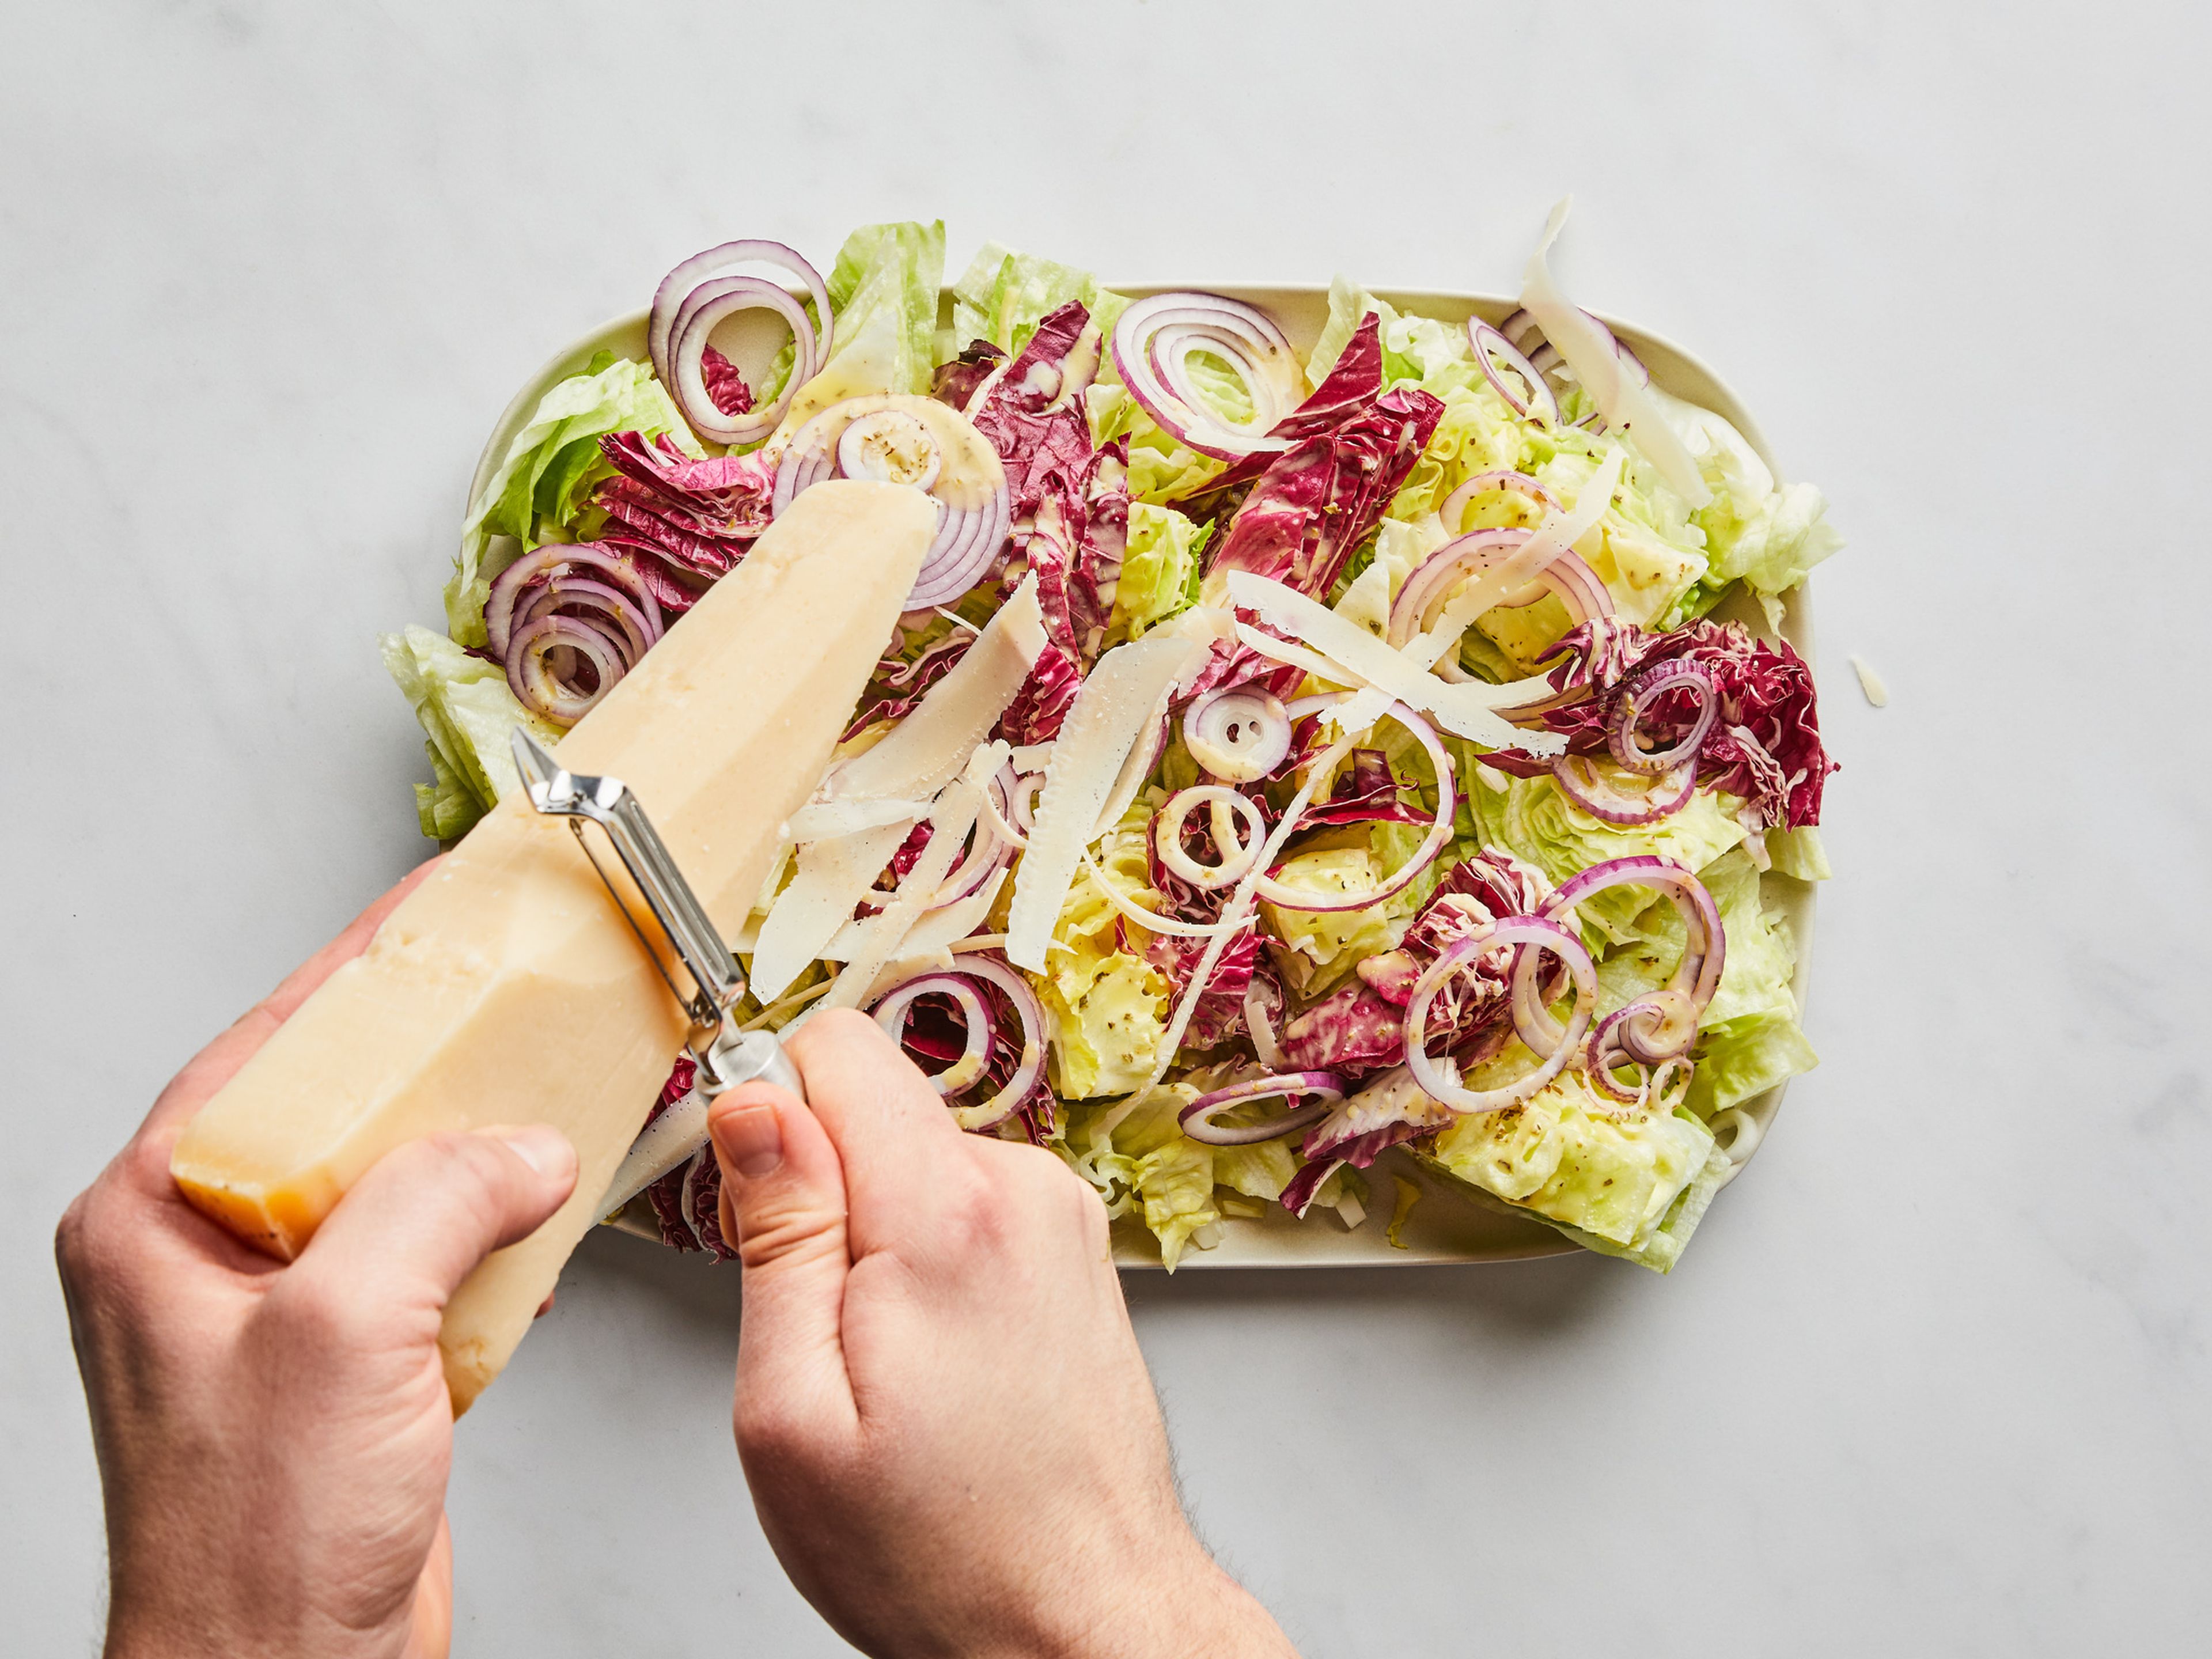 To serve, pour dressing over the serving platter. Use a vegetable peeler to shave Parmesan cheese over the top, and finish with freshly ground black pepper. Enjoy!